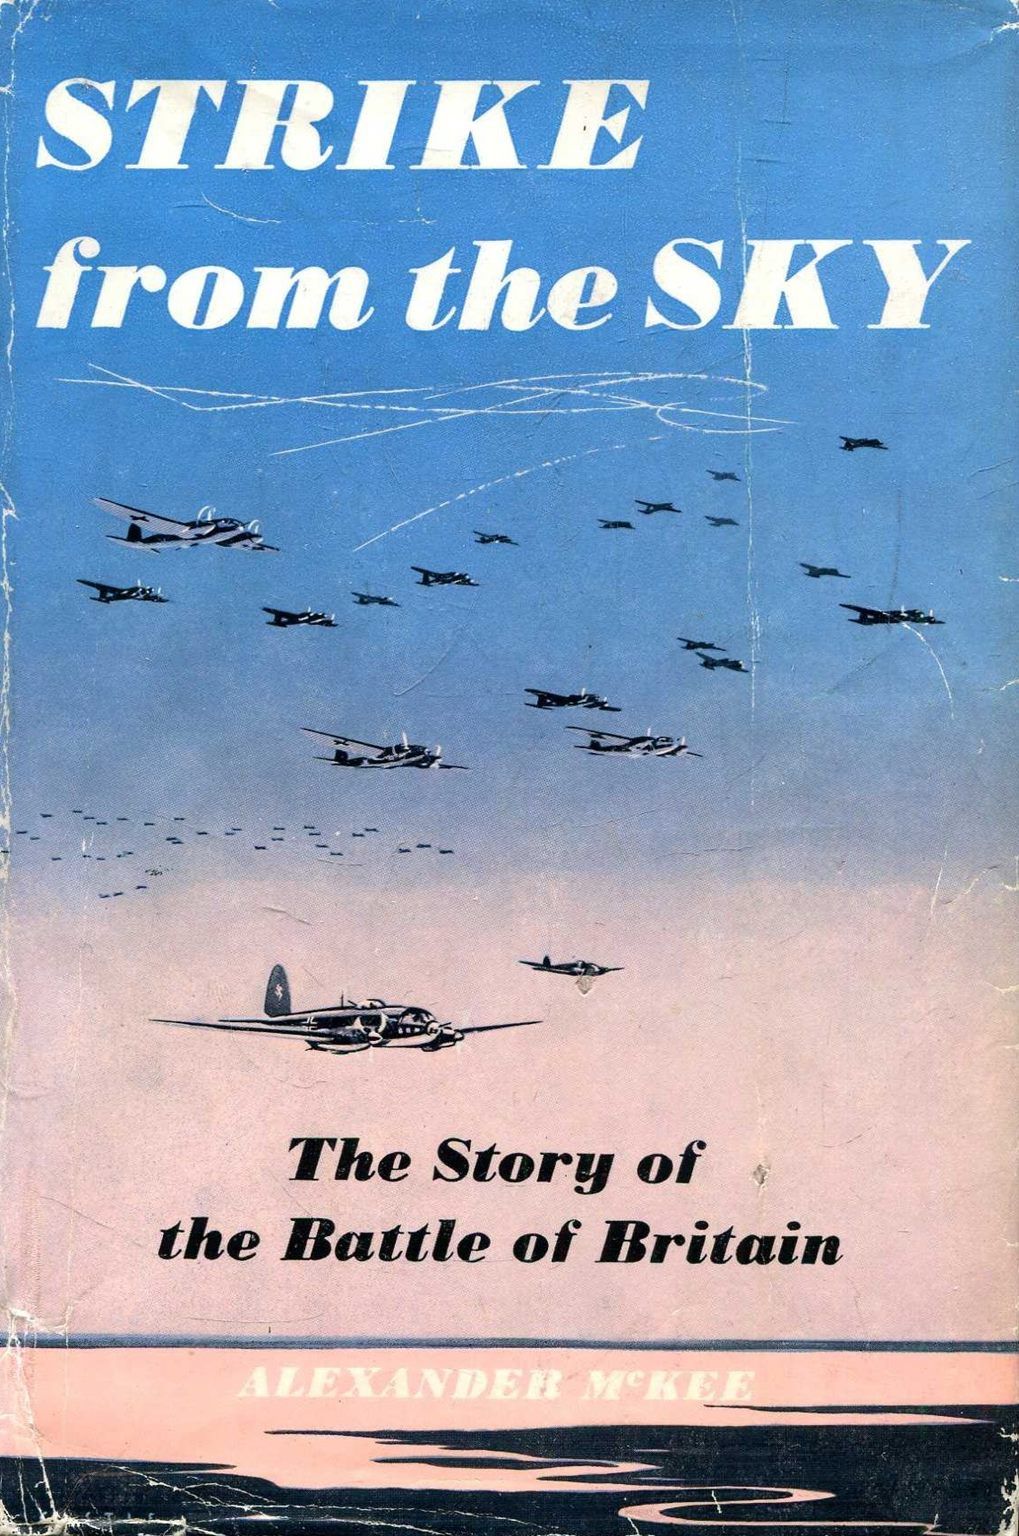 STRIKE FROM THE SKY: The Story of the Battle of Britain